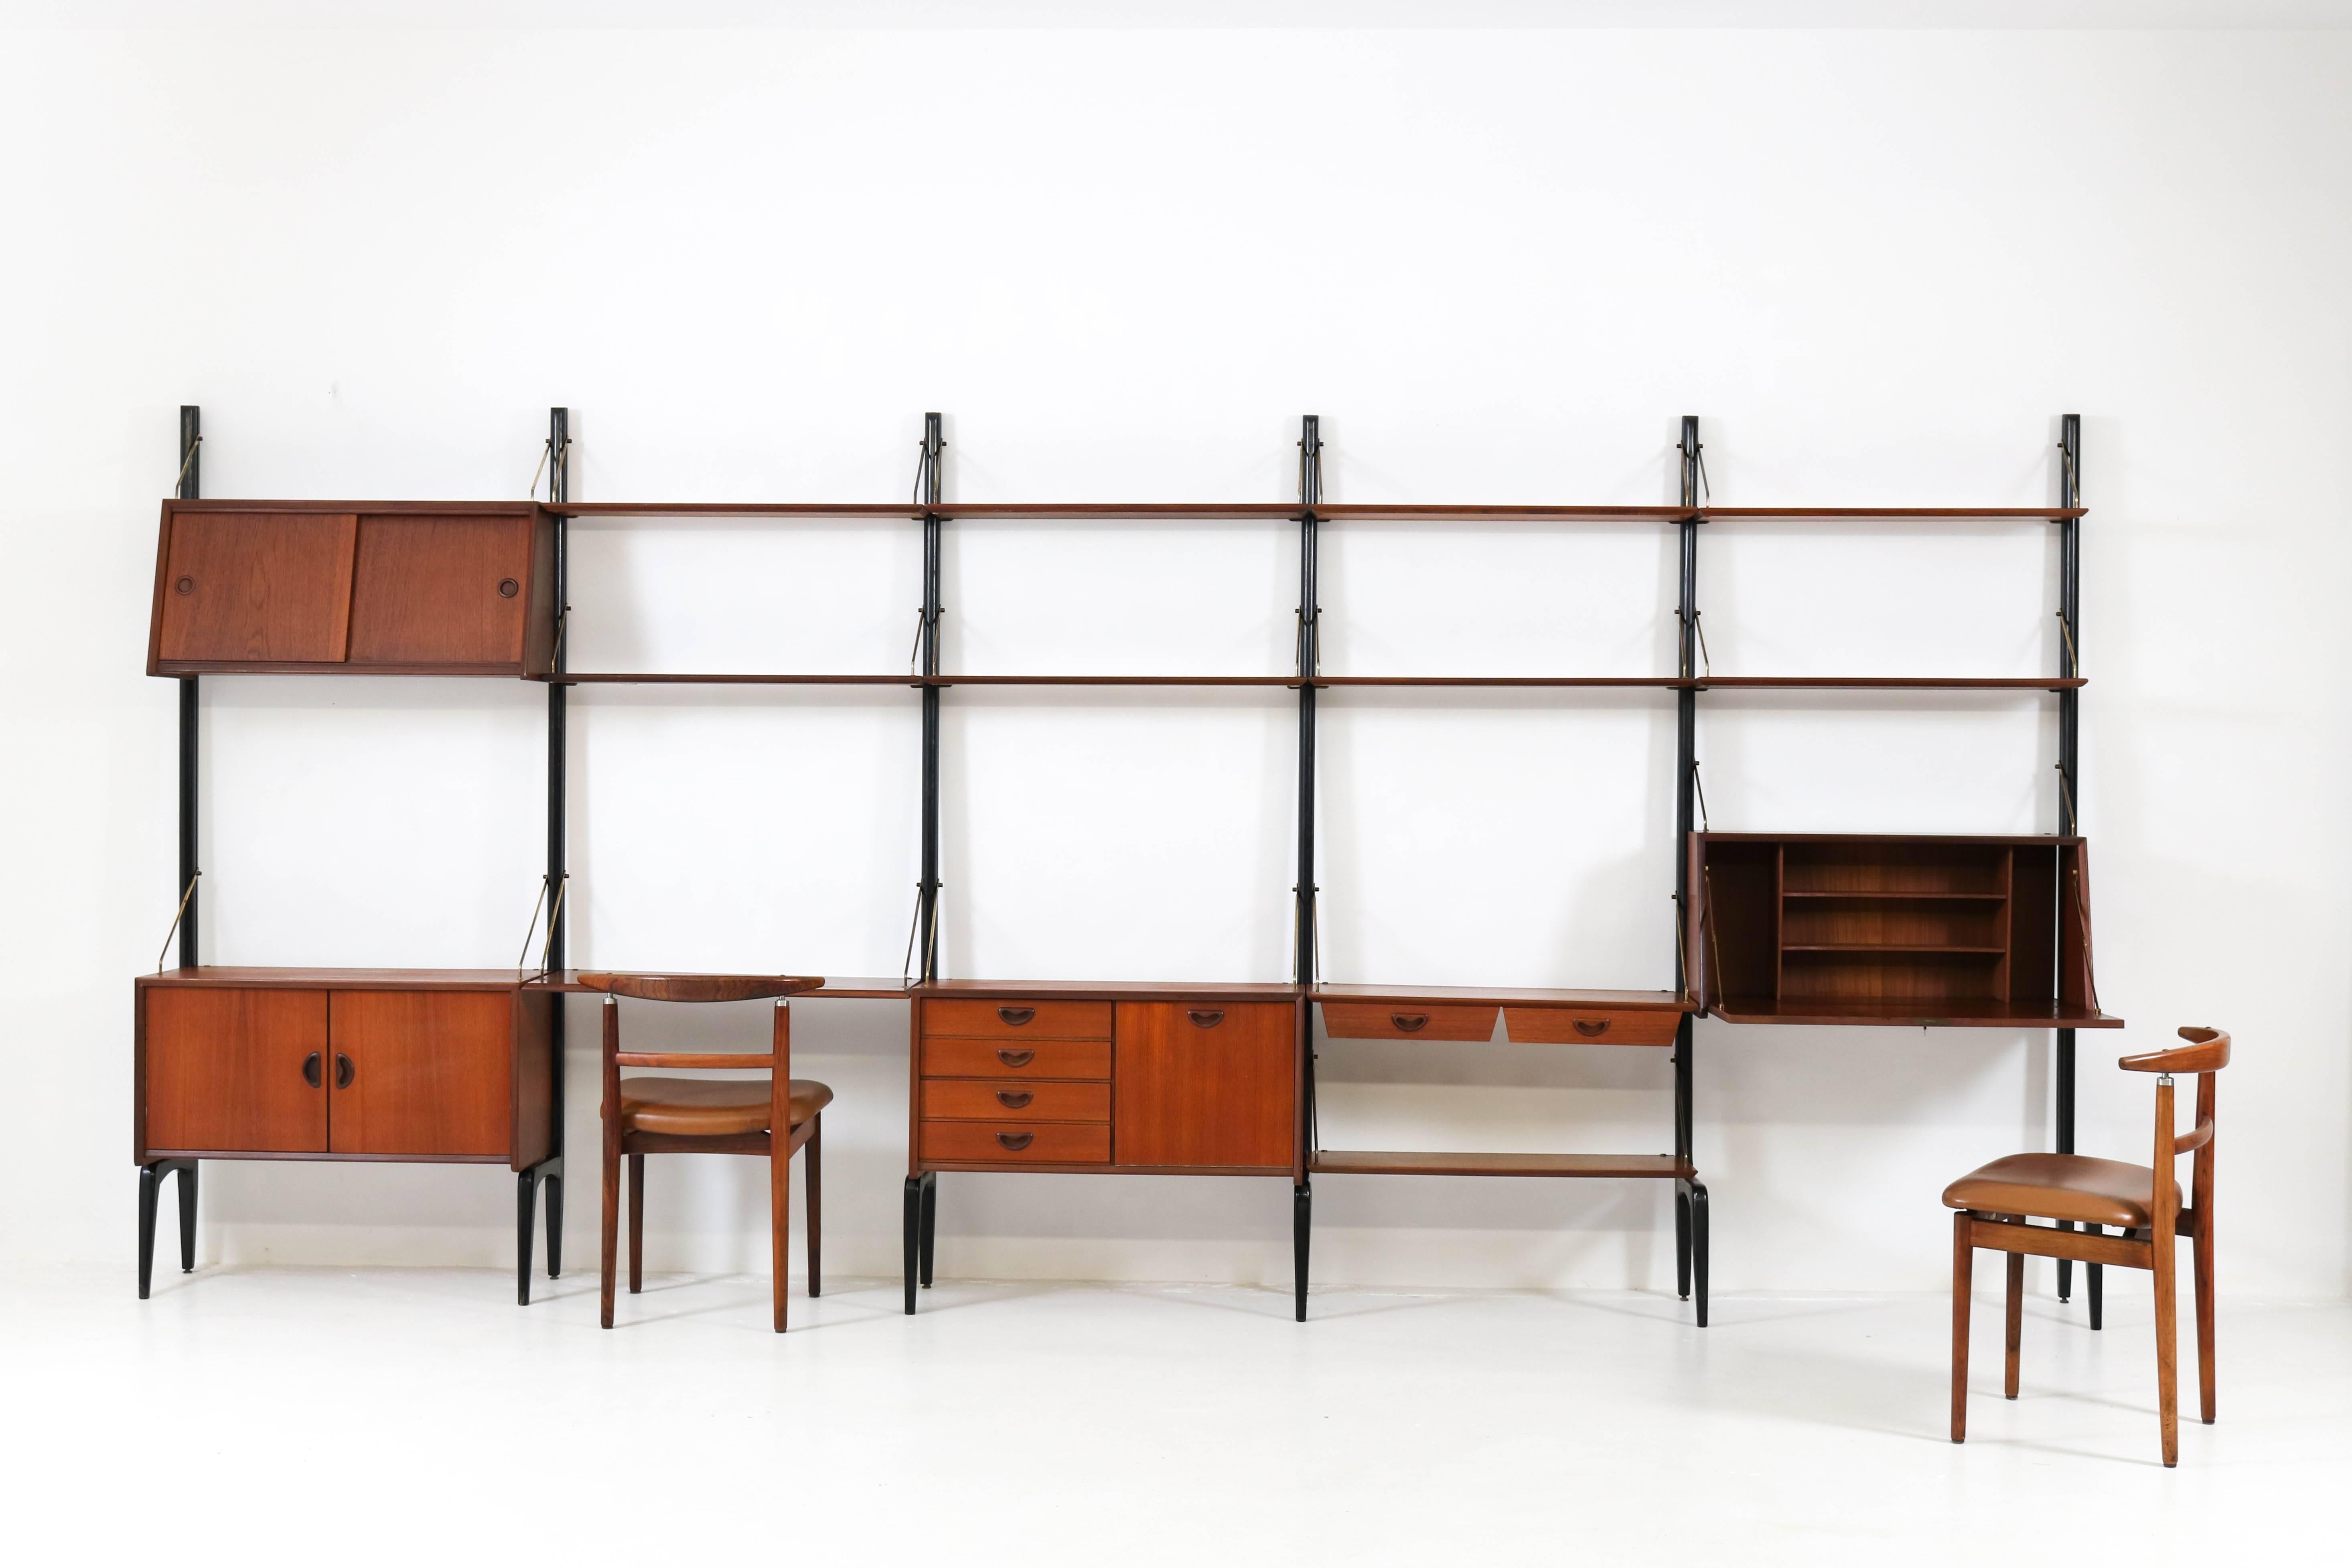 Extra large freestanding Mid-Century Modern wall unit by Louis Van Teeffelen for Webe, 1950s.
Original black lacquered wood, teak veneer and brass support rods with signs of wear and age.
This shelving system comprises:
Six original black